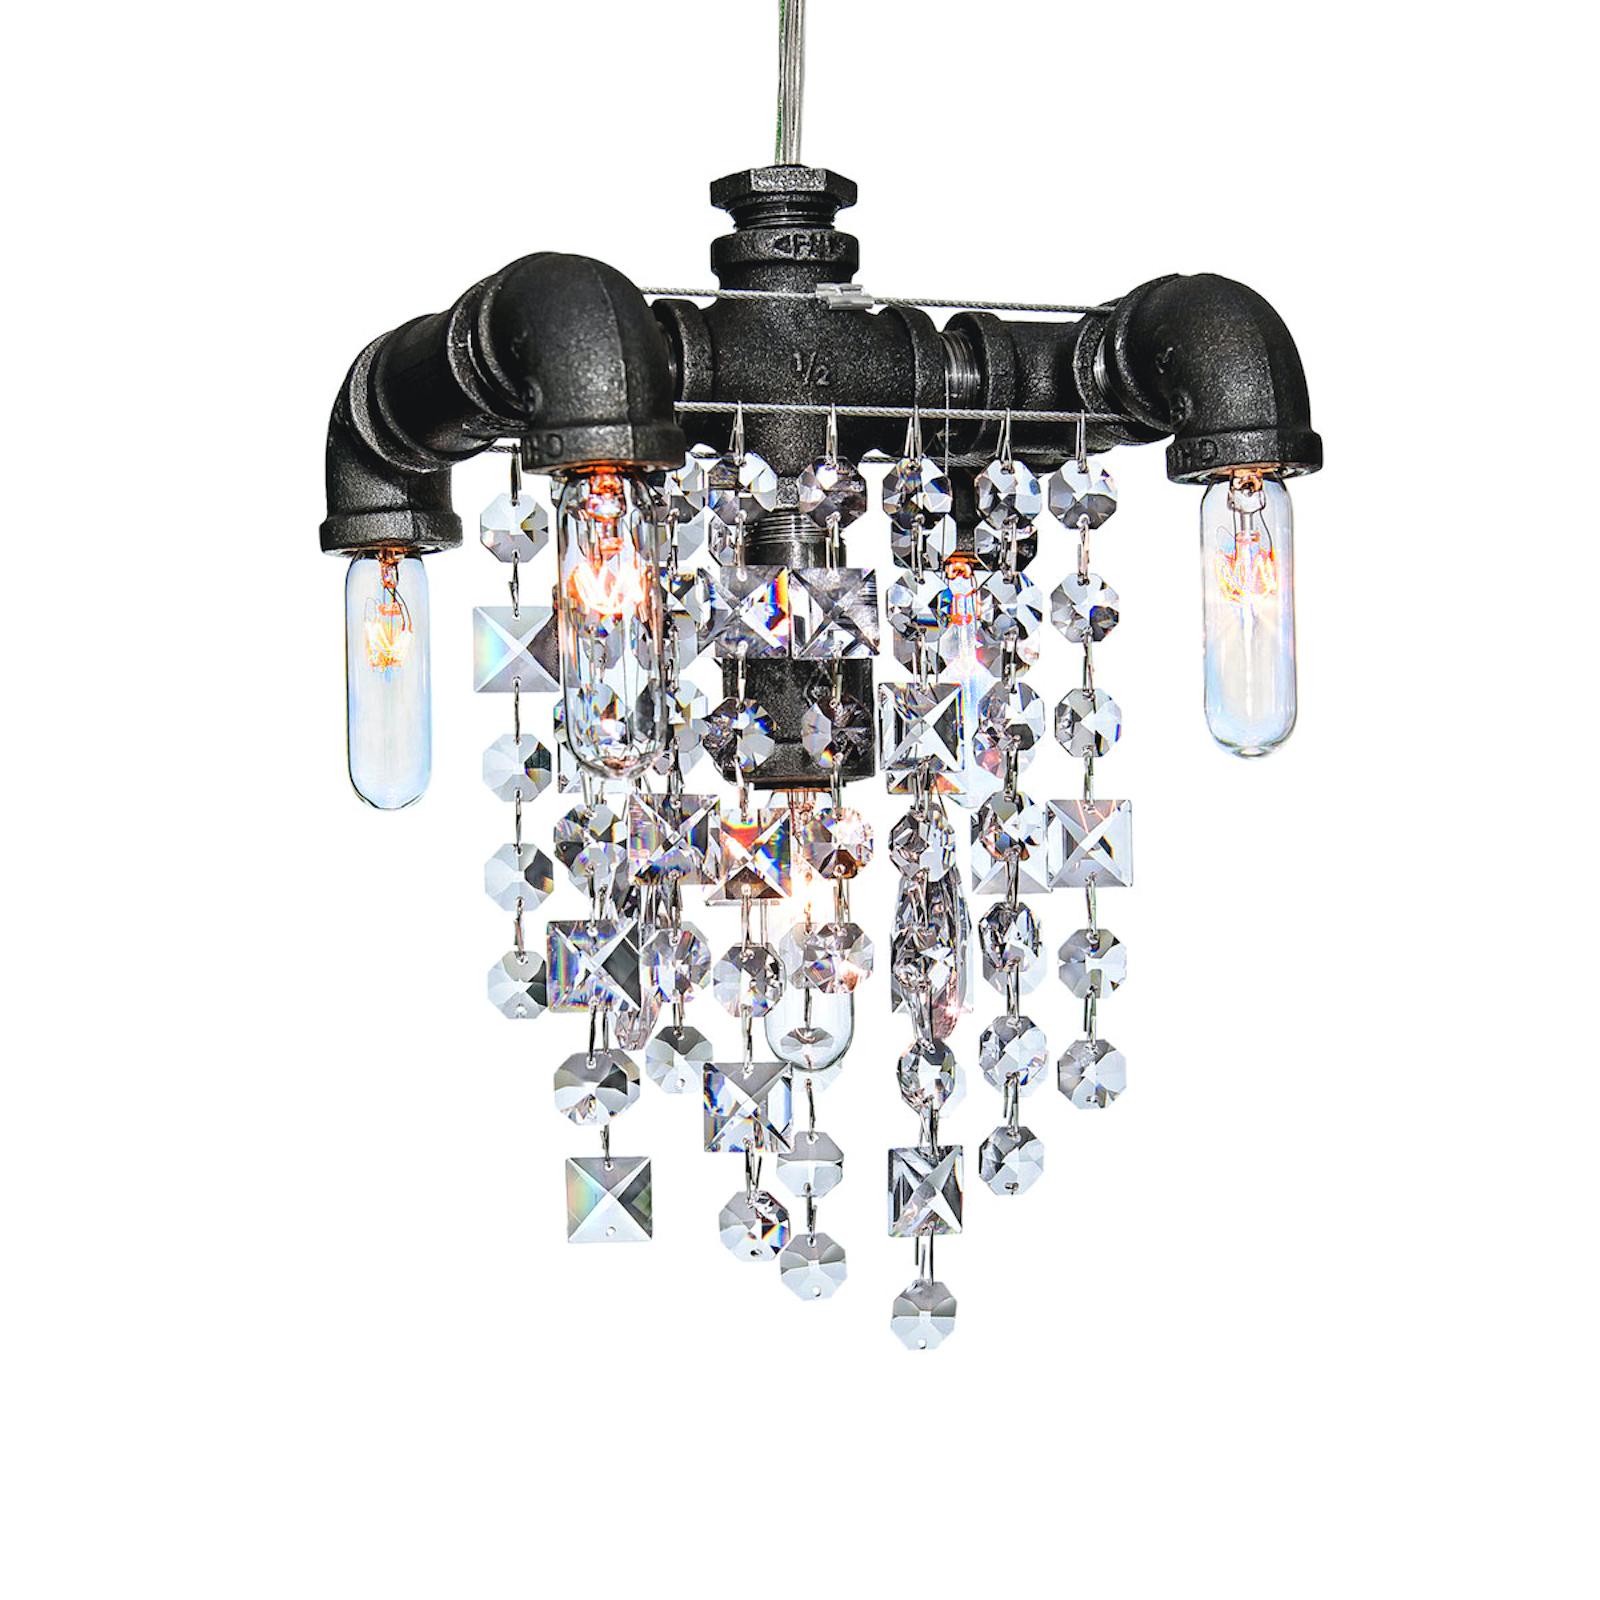 Tribeca Compact Chandelier Pendant 5 Bulb by Michael McHale
Dimensions: D 15.2 x W 16.5 x H 28 cm.
Materials: steel, optically-pure gem-cut crystal.

5 x candelabra base T6 bulb, either incandescent or LED.

All our lamps can be wired